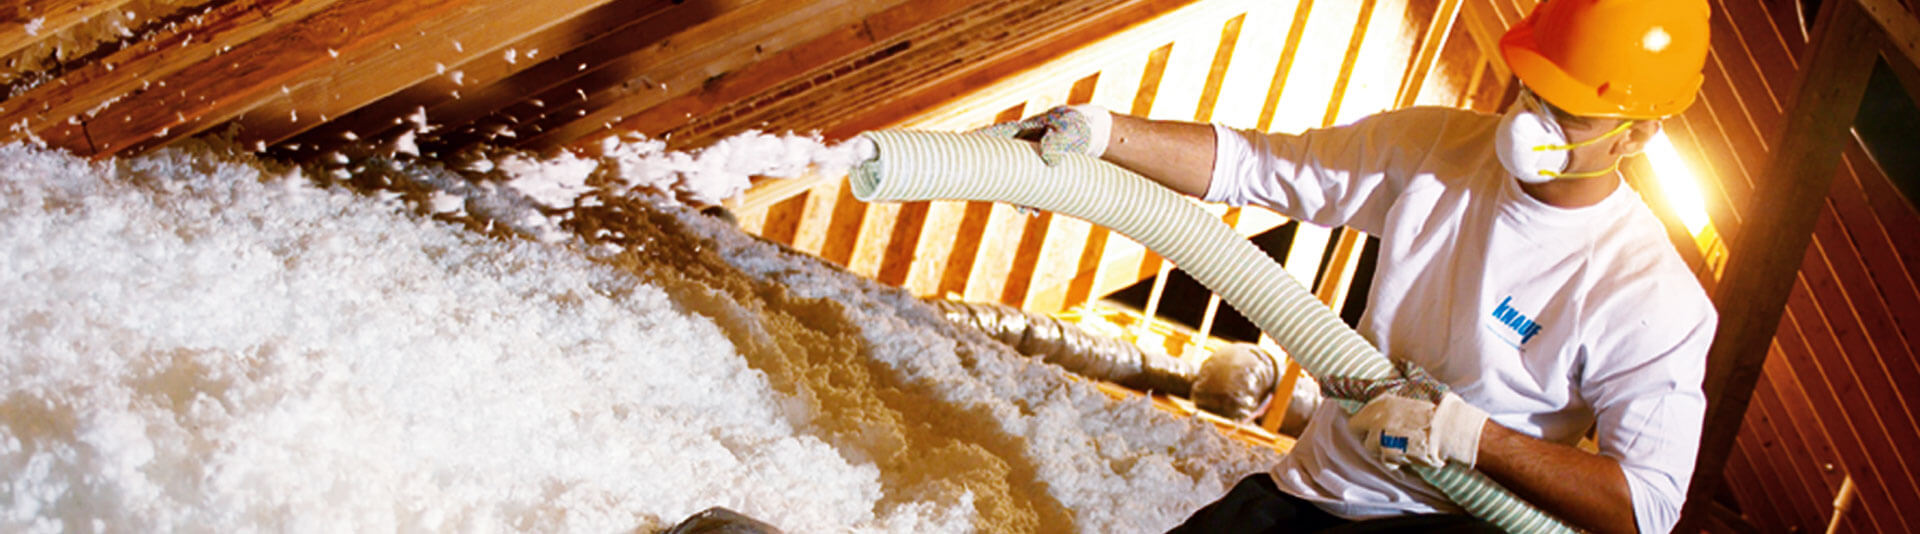 Insulation being sprayed in a home